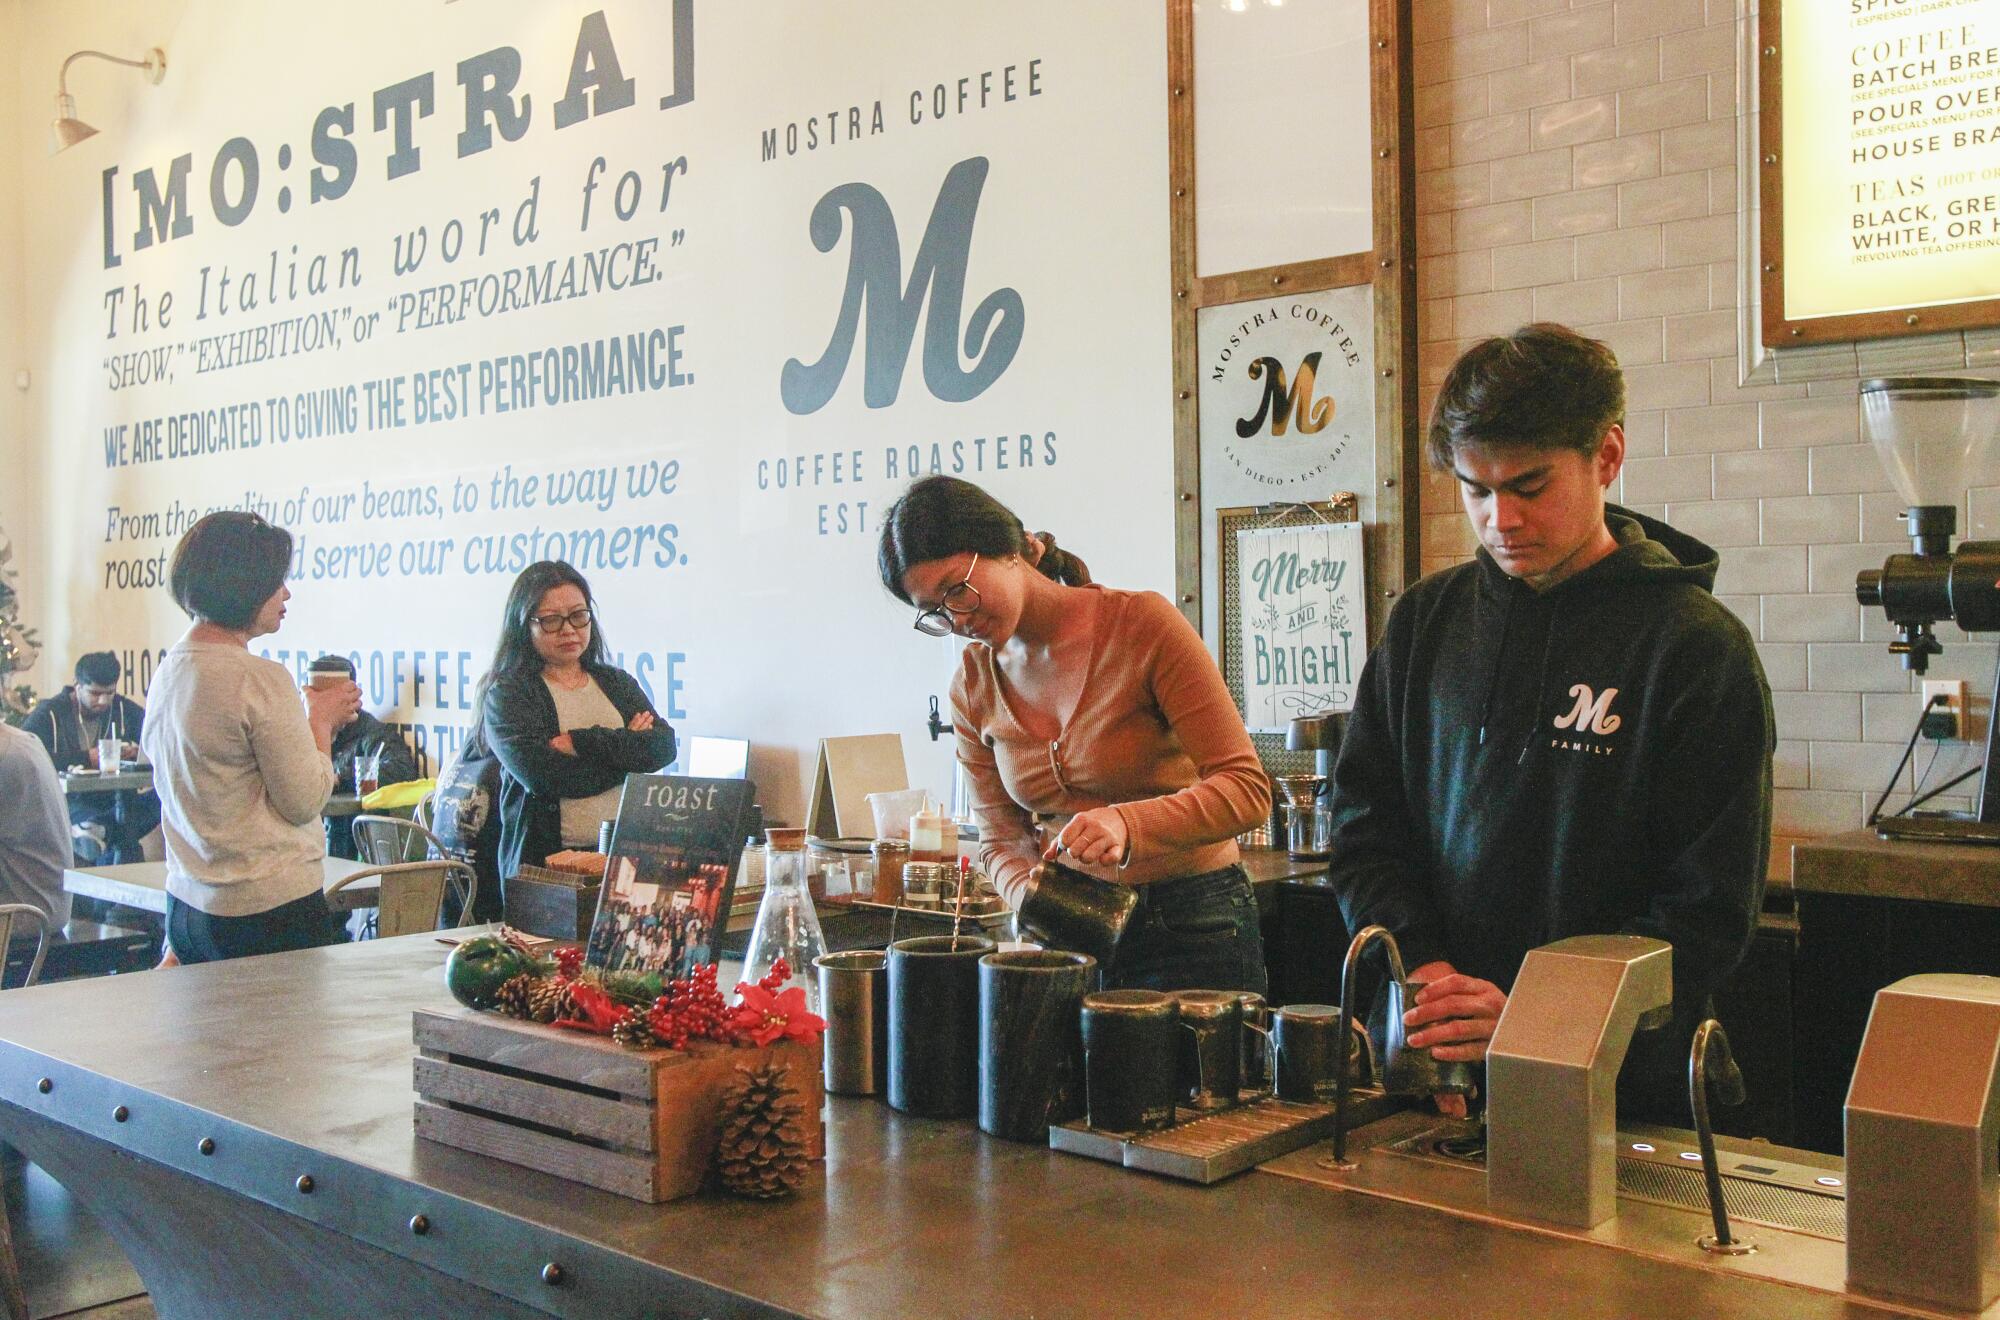 Mostra opened its first brick-and-mortar shop at 12045 Carmel Mountain Road in the San Diego neighborhood of Carmel Mountain Ranch. 